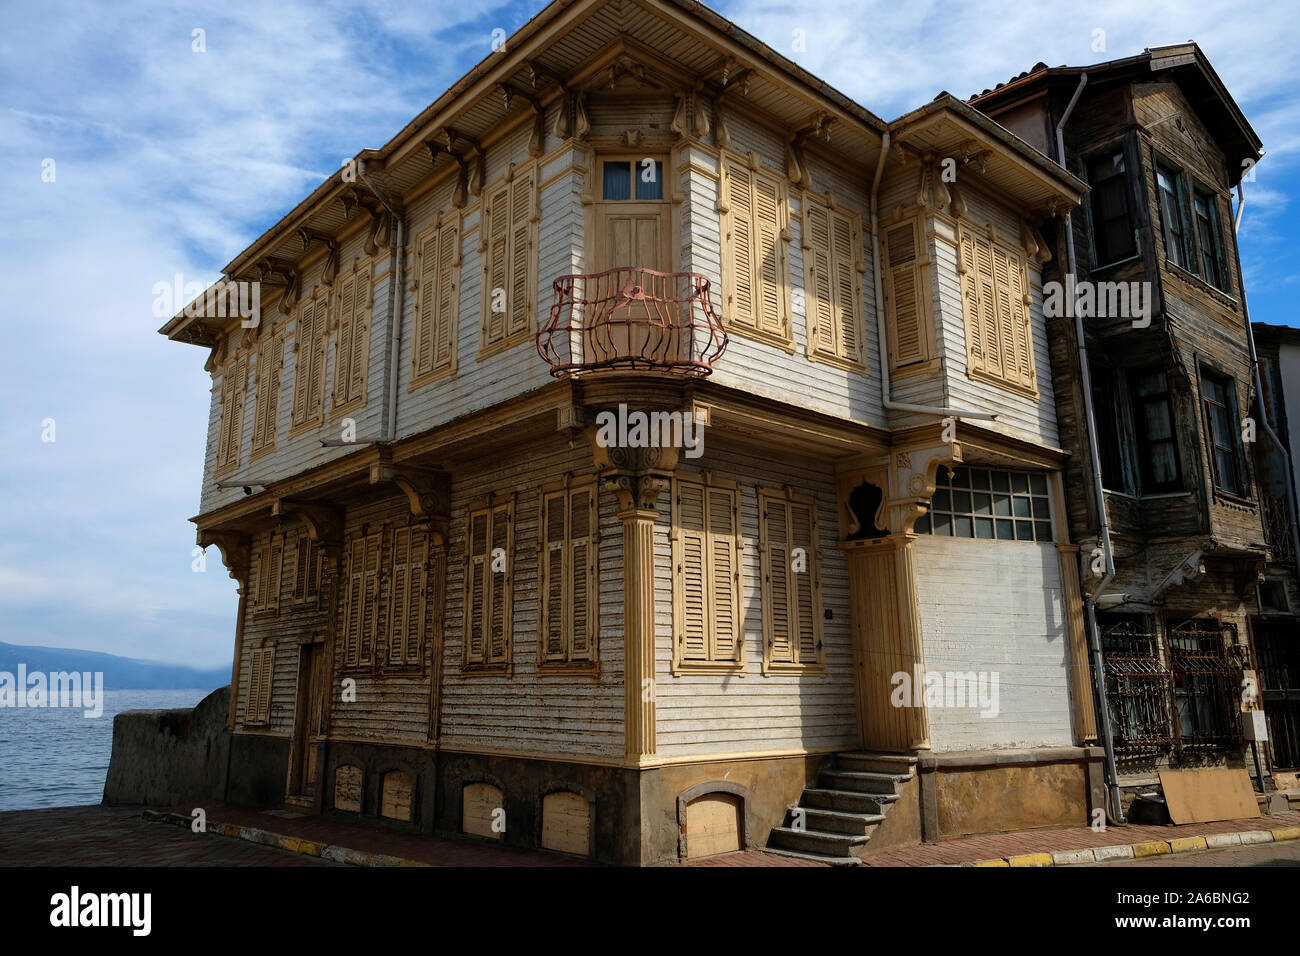 There are many Old wooden houses in the neighborhood of Giritli in the district of mudanya. Stock Photo